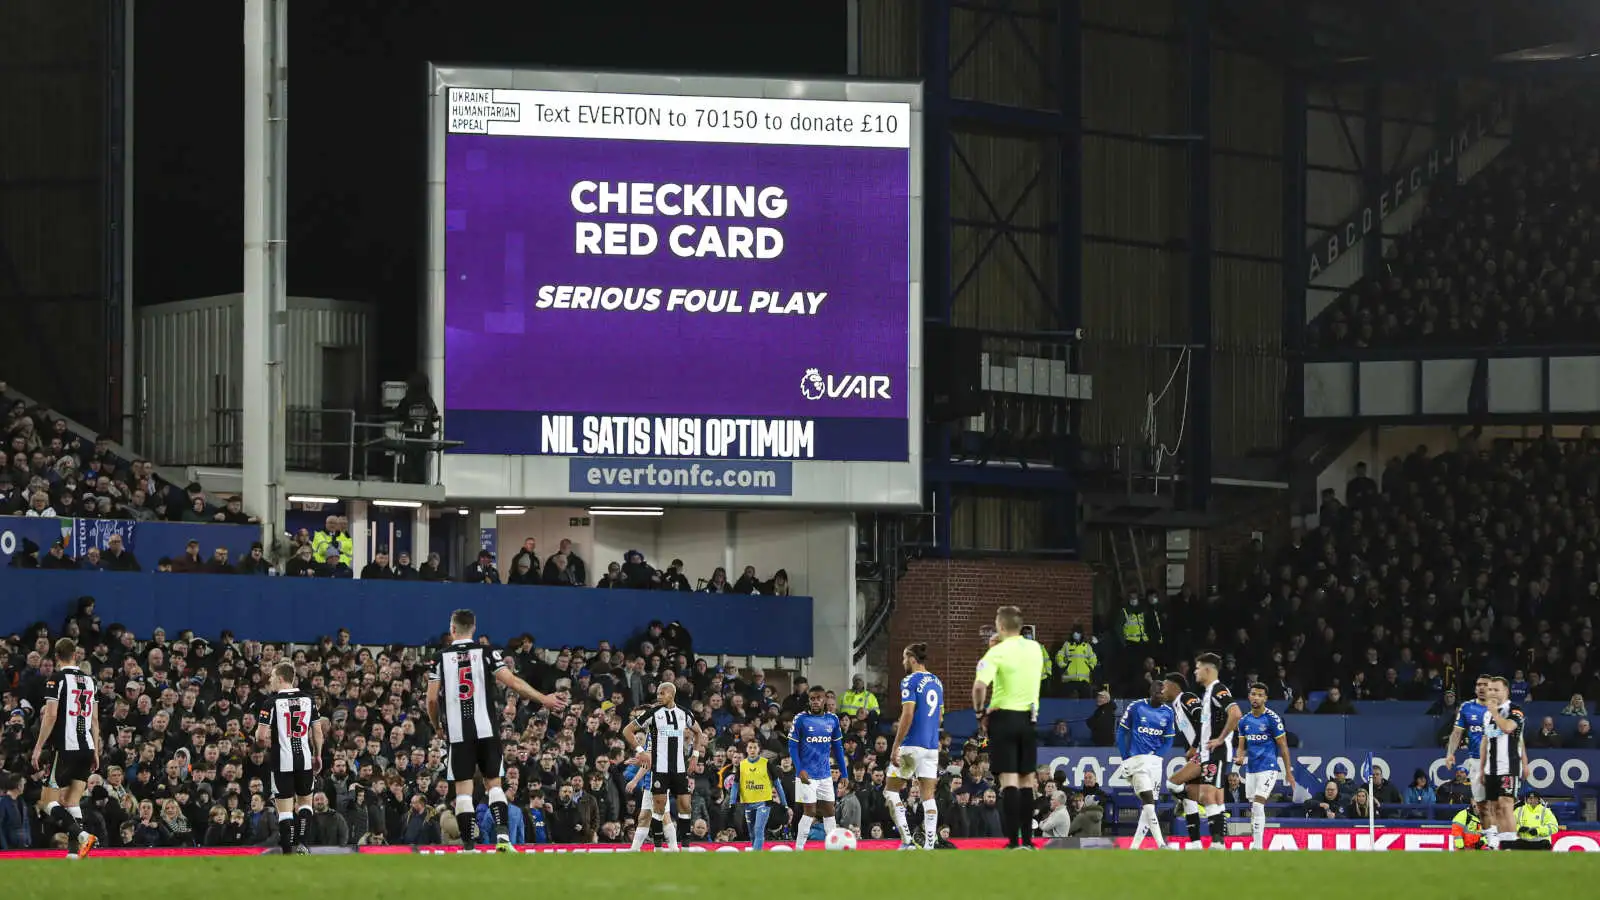 Everton sweat on a VAR decision during their match against Newcastle United